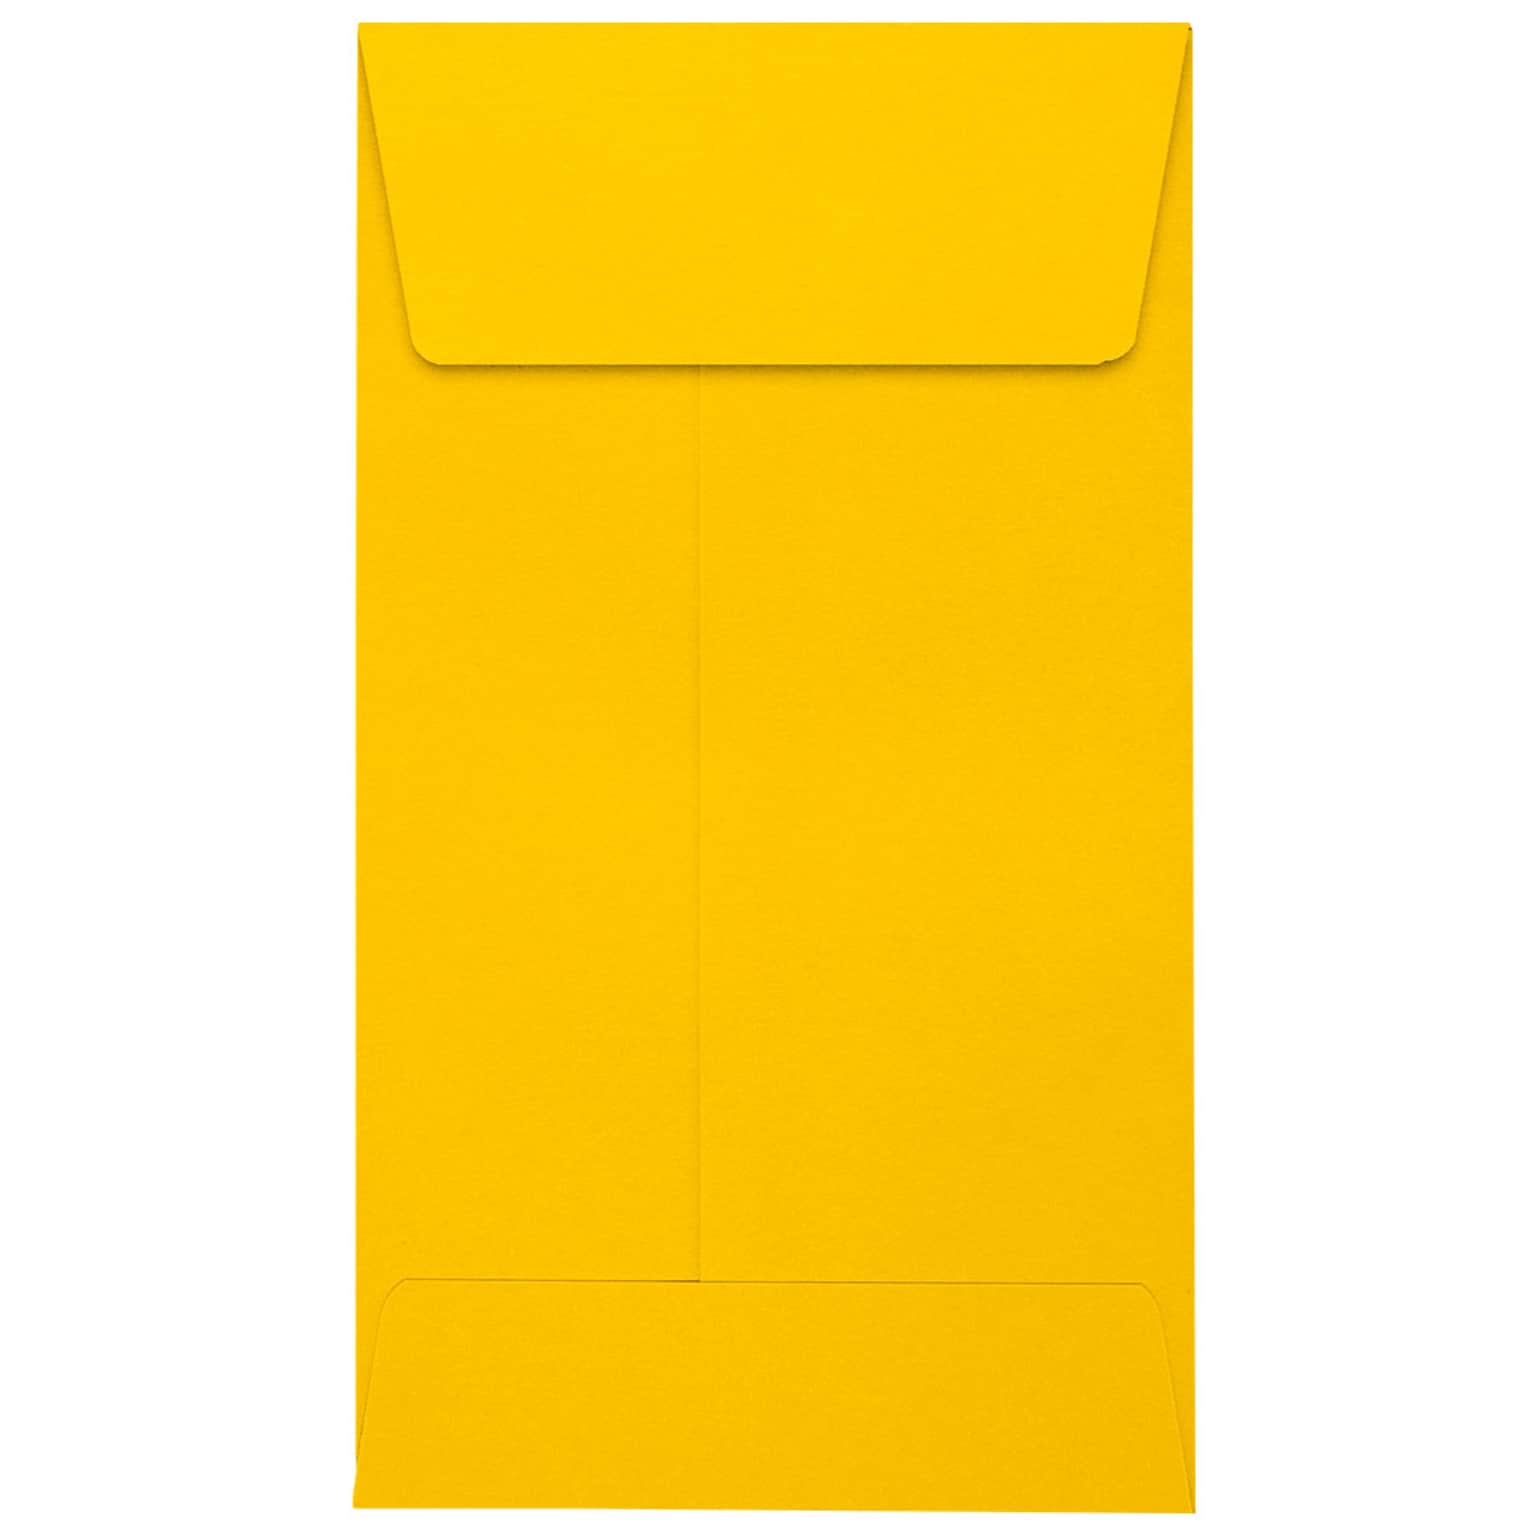 JAM Paper #5 1/2 Coin Envelopes ,Sunflower , 50 Pack, 3 1/8 x 5 1/2, Yellow (LUX-512CO-12-50)